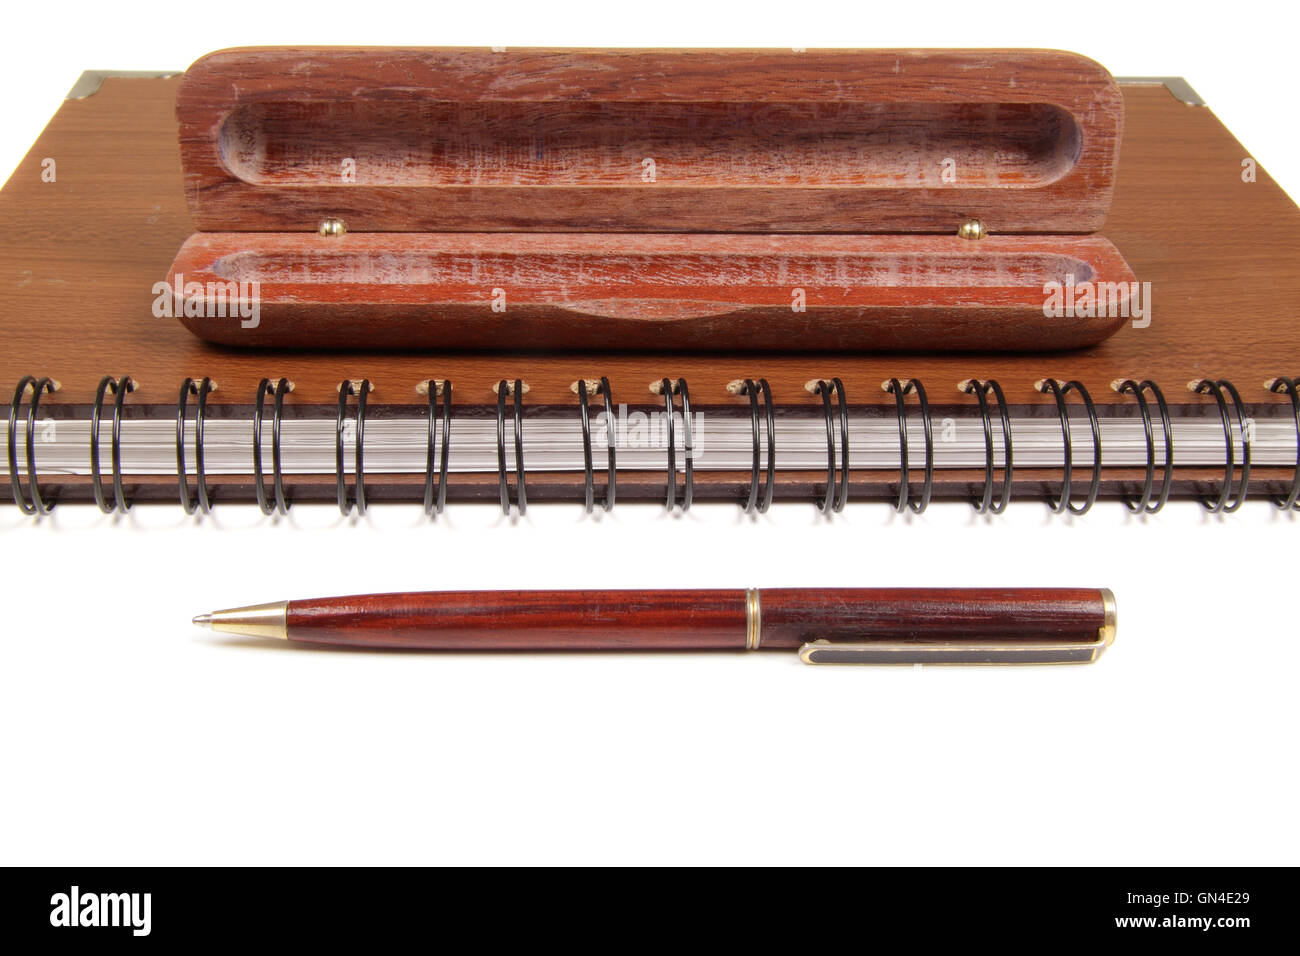 pen in an opened wooden case on notebook Stock Photo